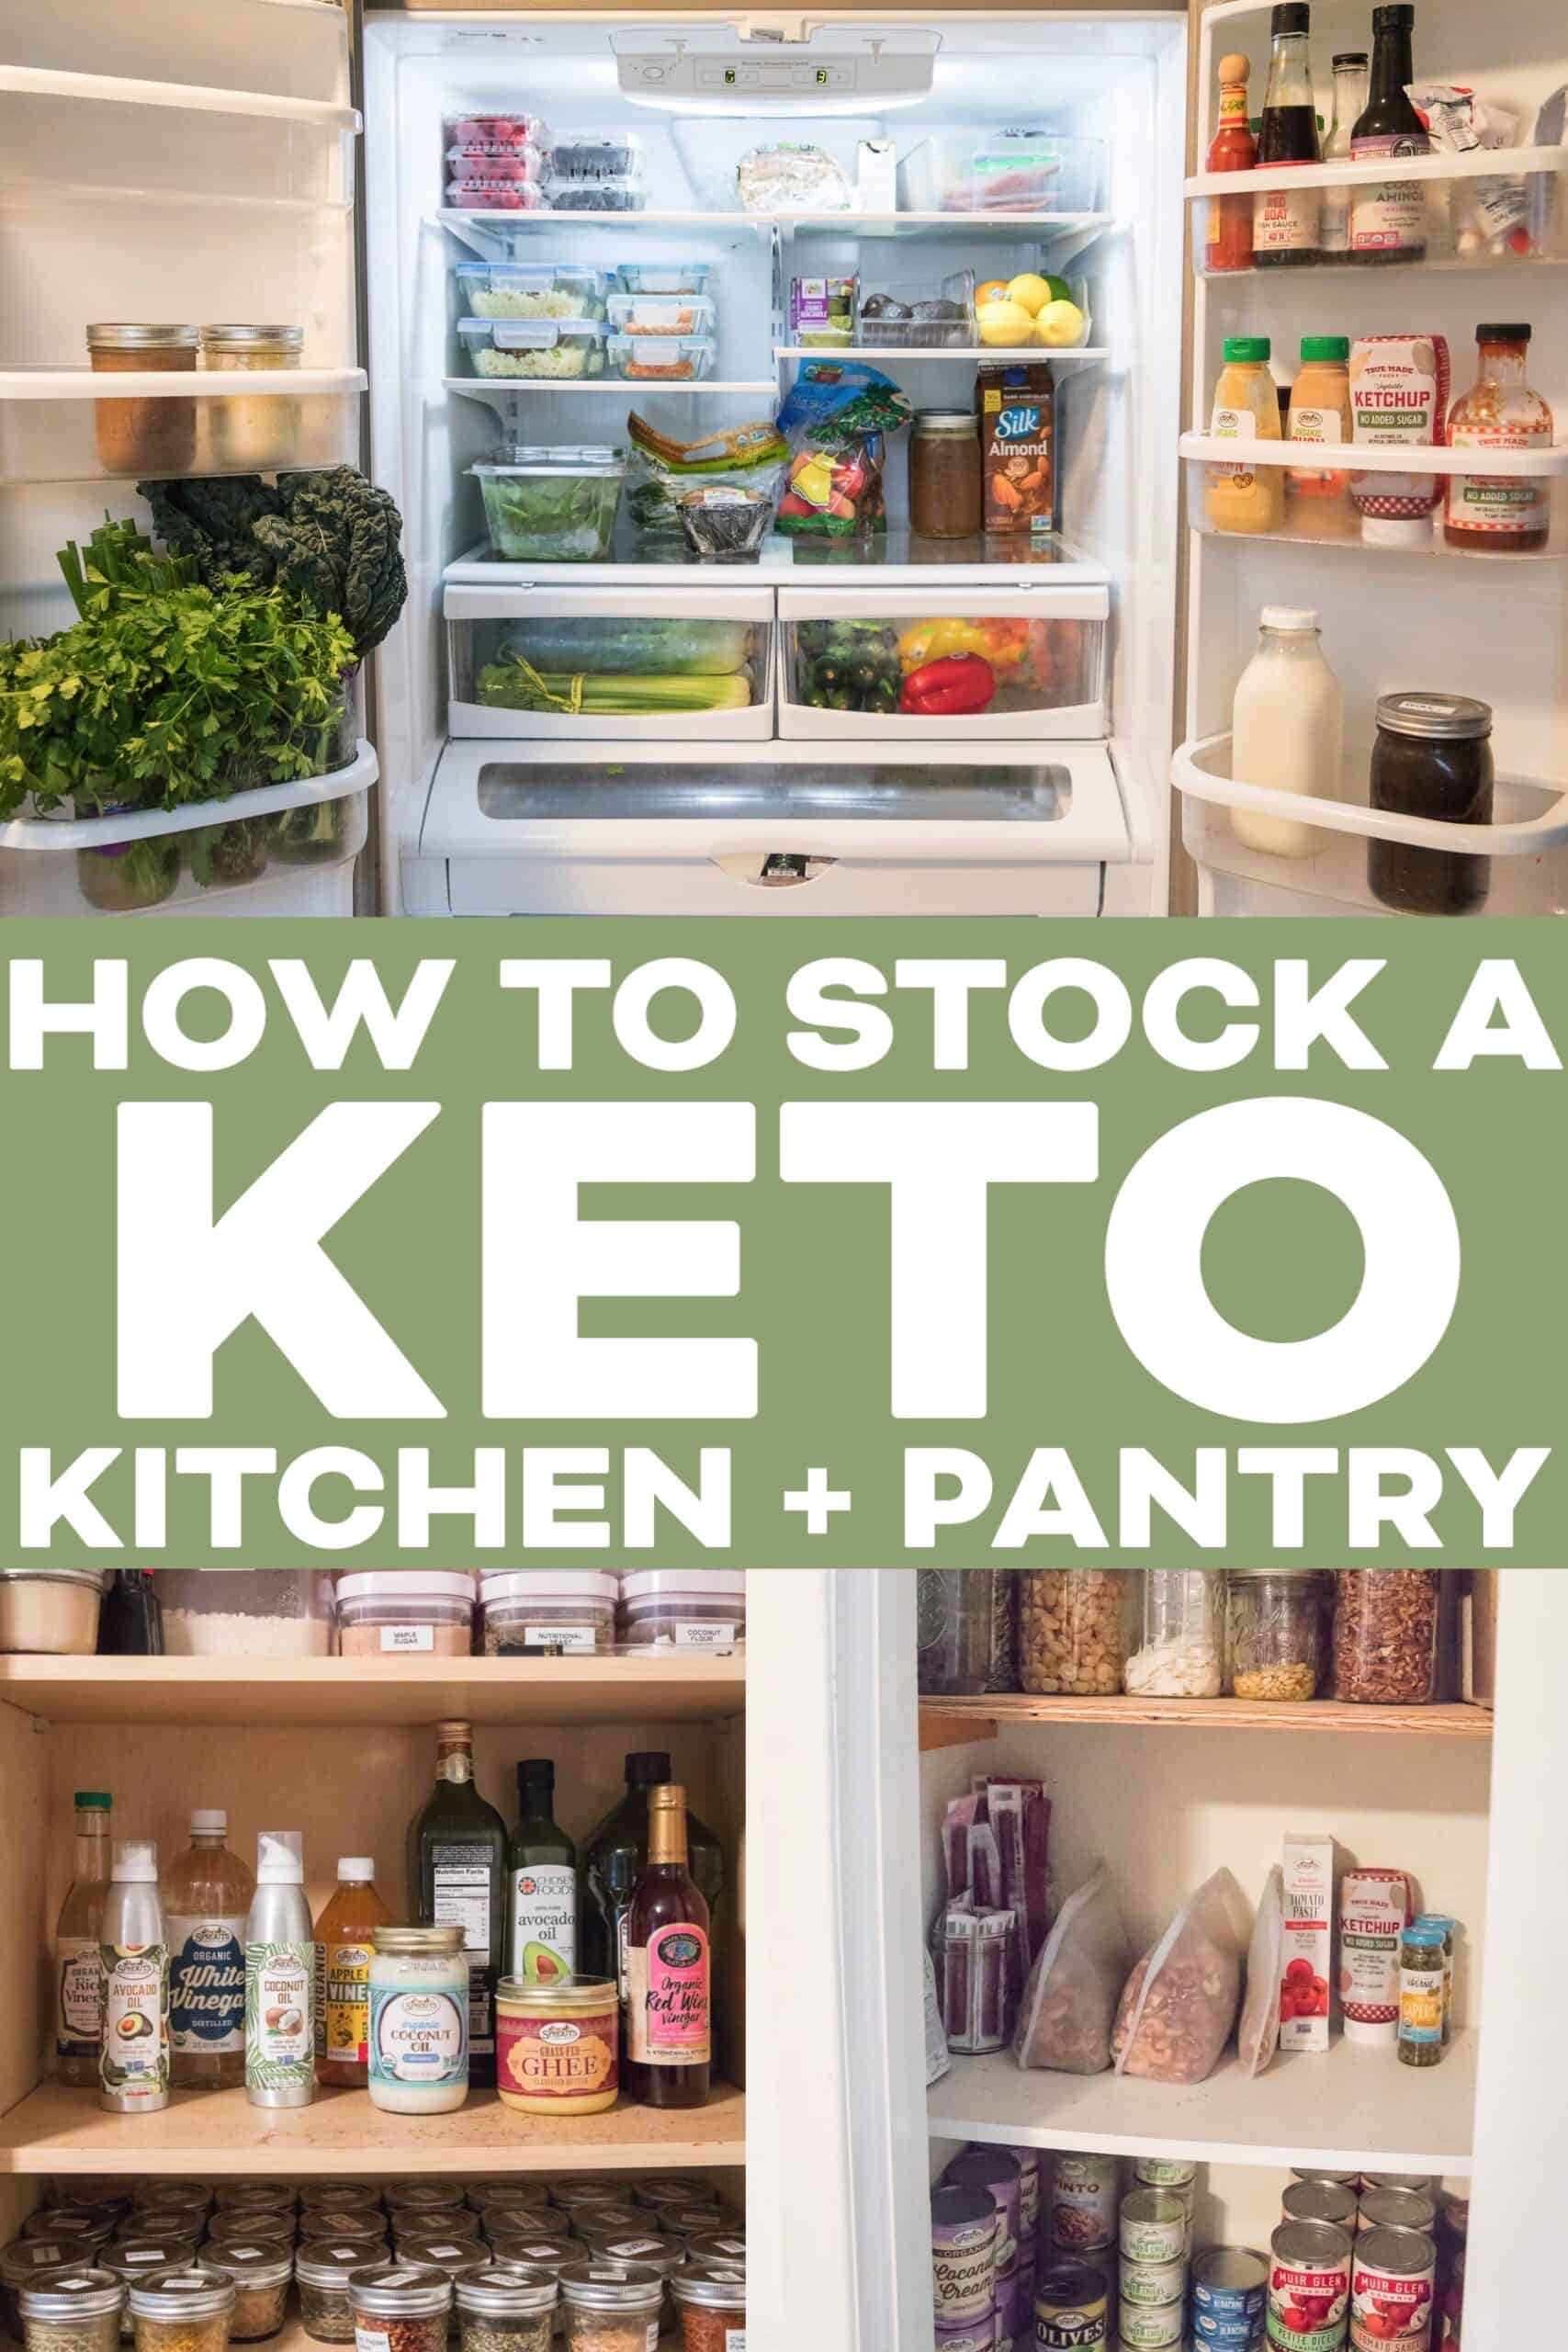 How To Stock Your Freezer To Cook Anything - Recipes From A Pantry